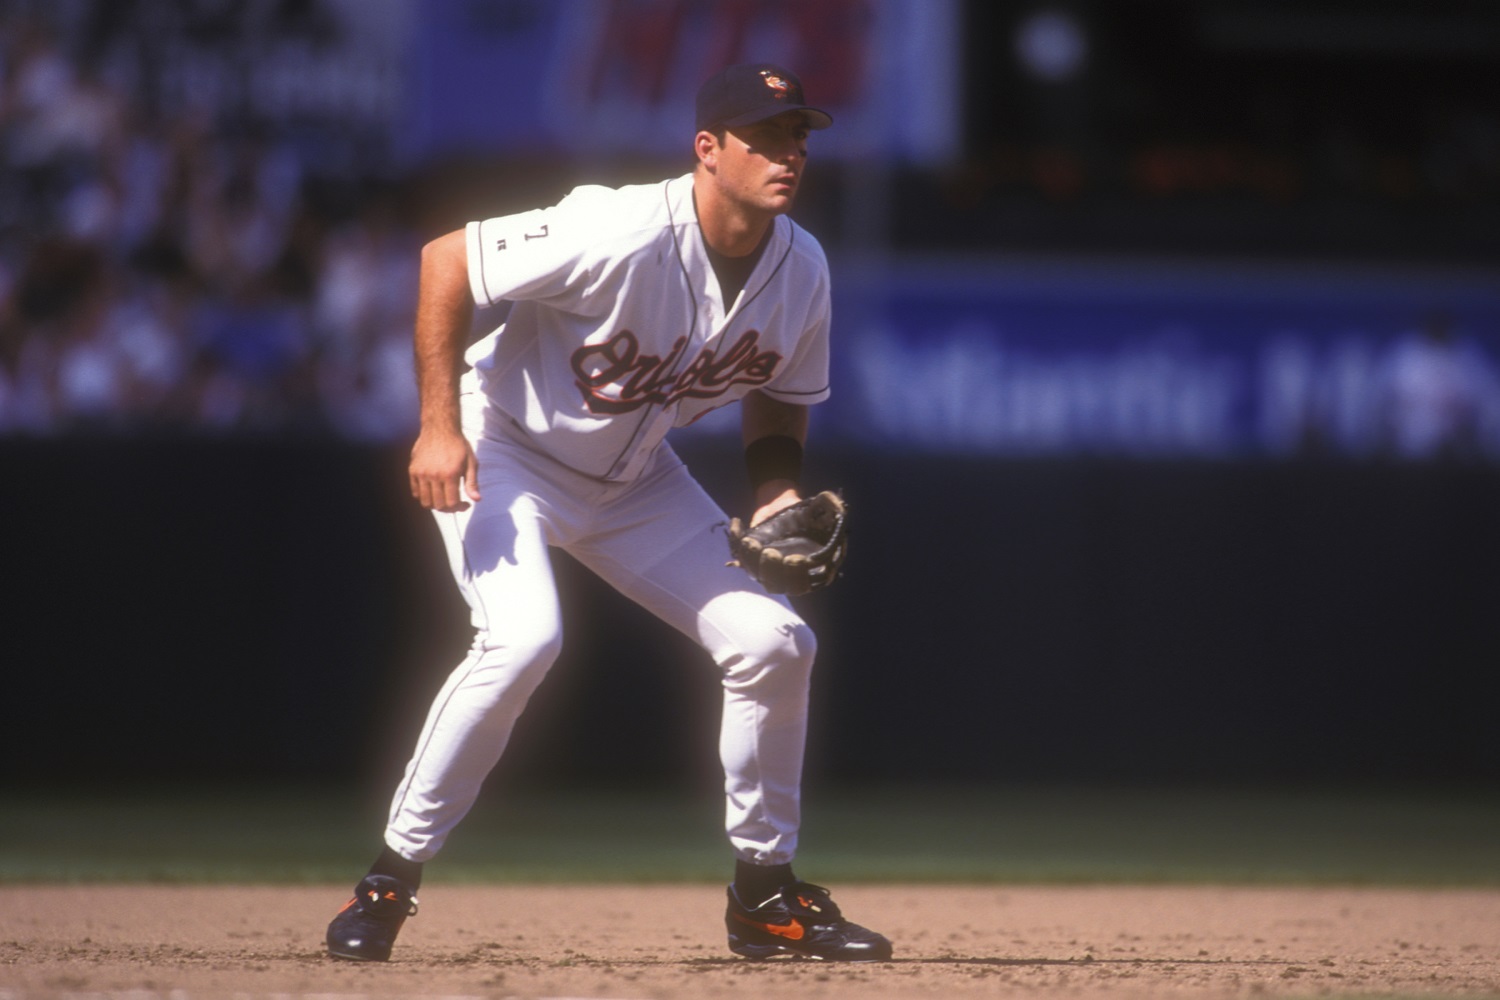 The NBA's Philadelphia 76ers and baseball's Baltimore Orioles drafted Ryan Minor weeks apart in 1996 out of the University of Oklahoma. | Mitchell Layton/Getty Images